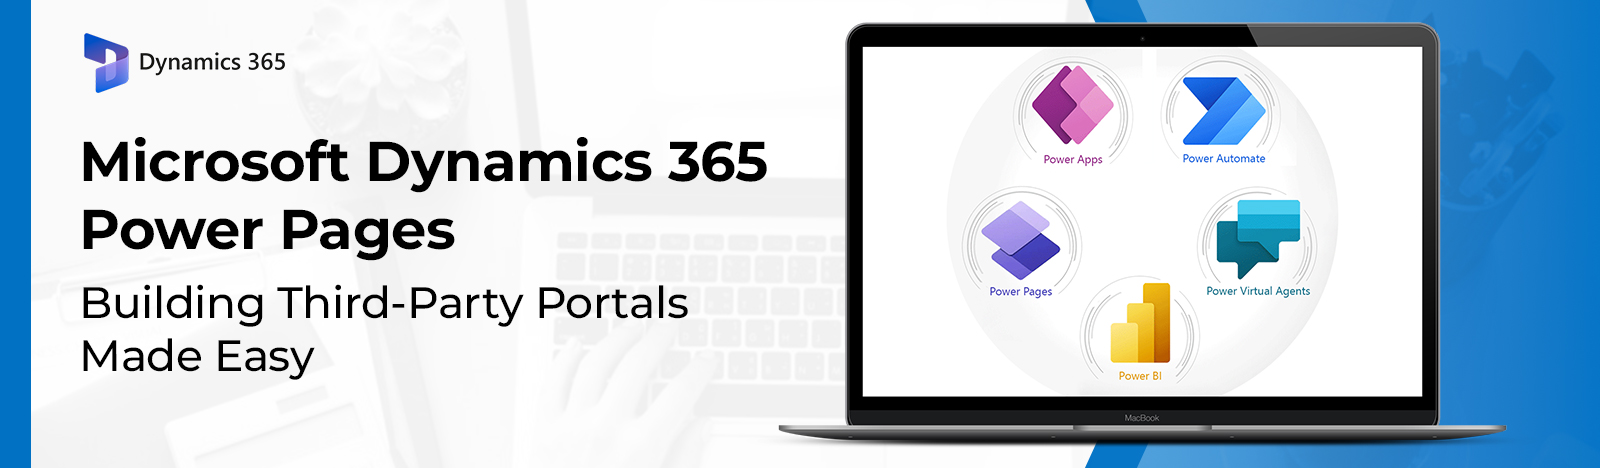 Microsoft Dynamics 365 Power Pages: Building Third-Party Portals Made Easy